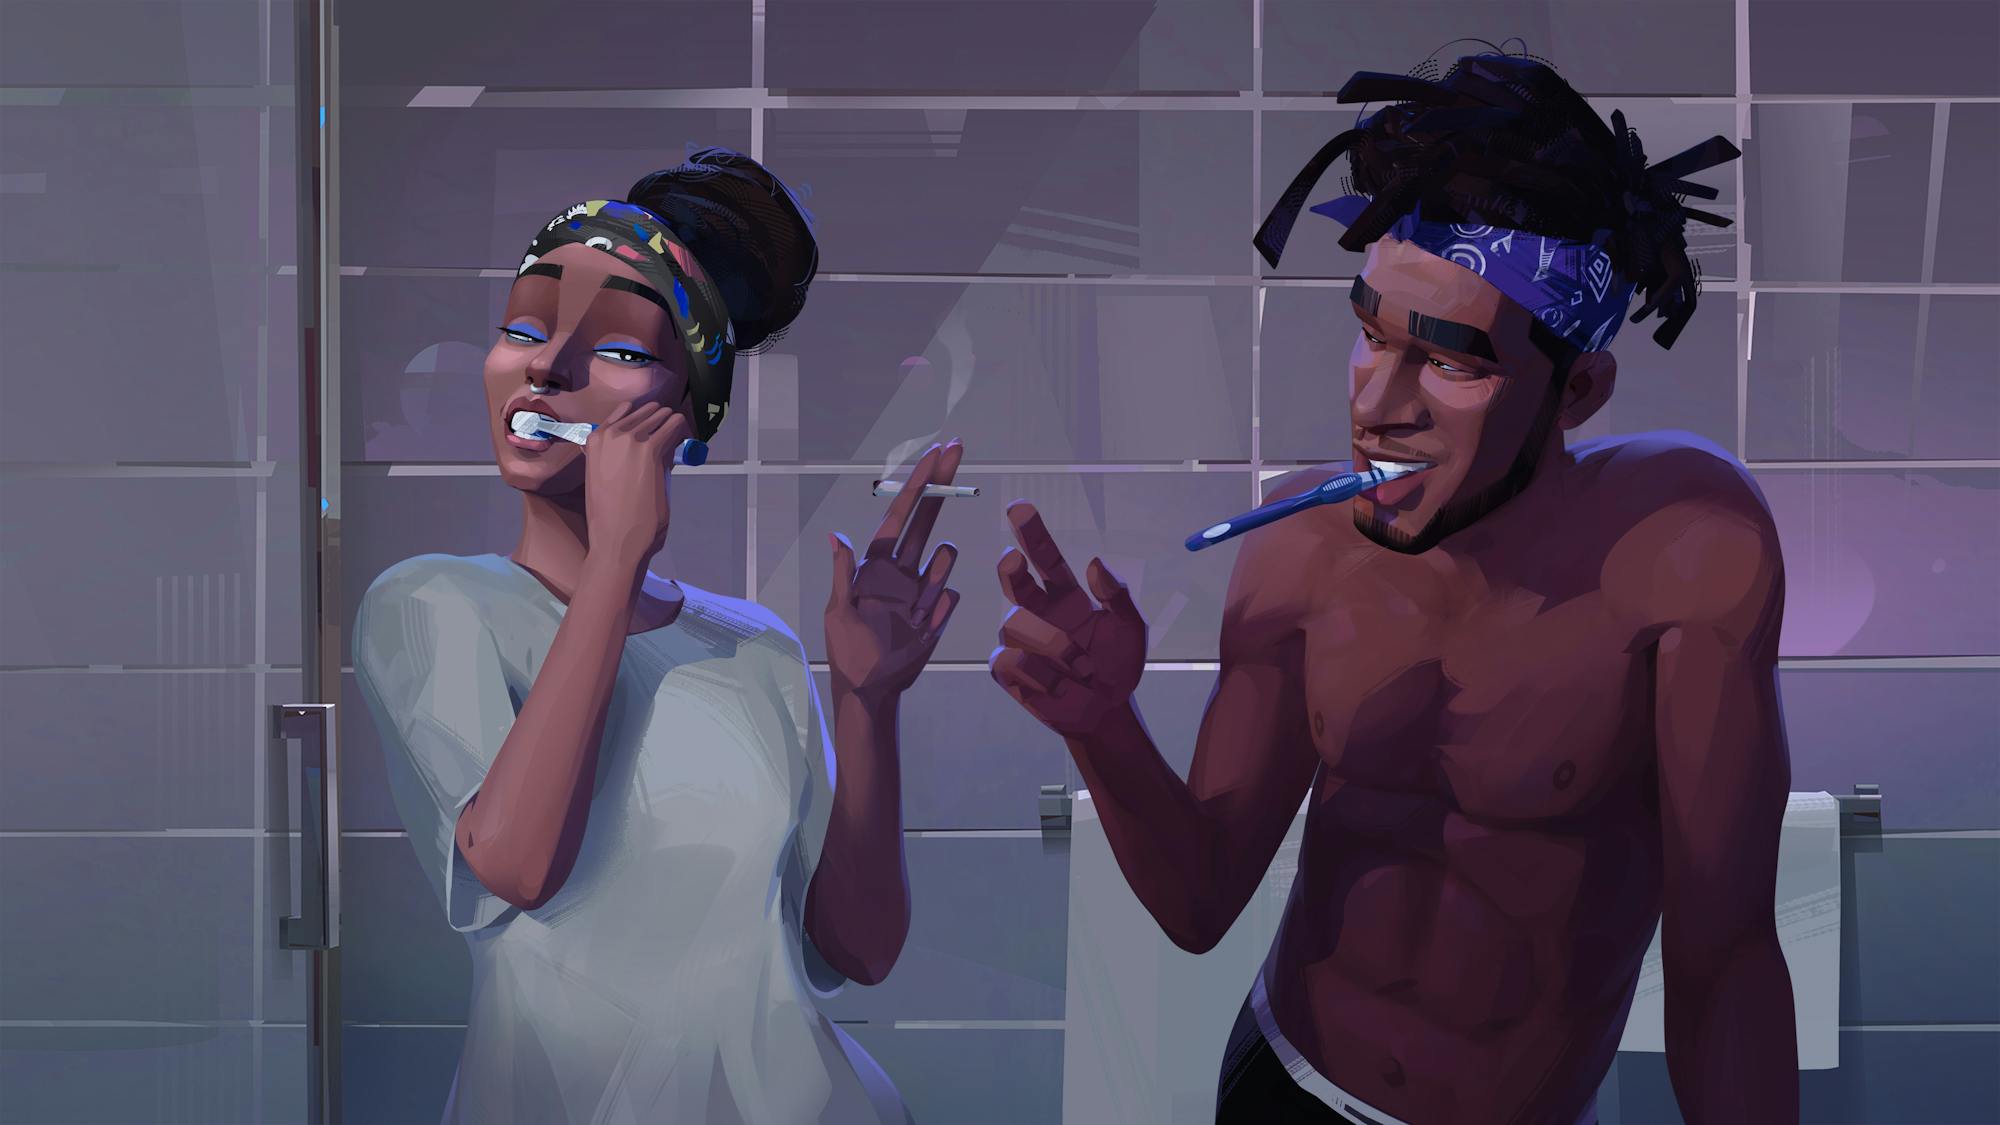 Meadow (Jessica Williams) and Jabari (Scott Mescudi) brush their teeth and share a joint in a purple tiled bathroom.